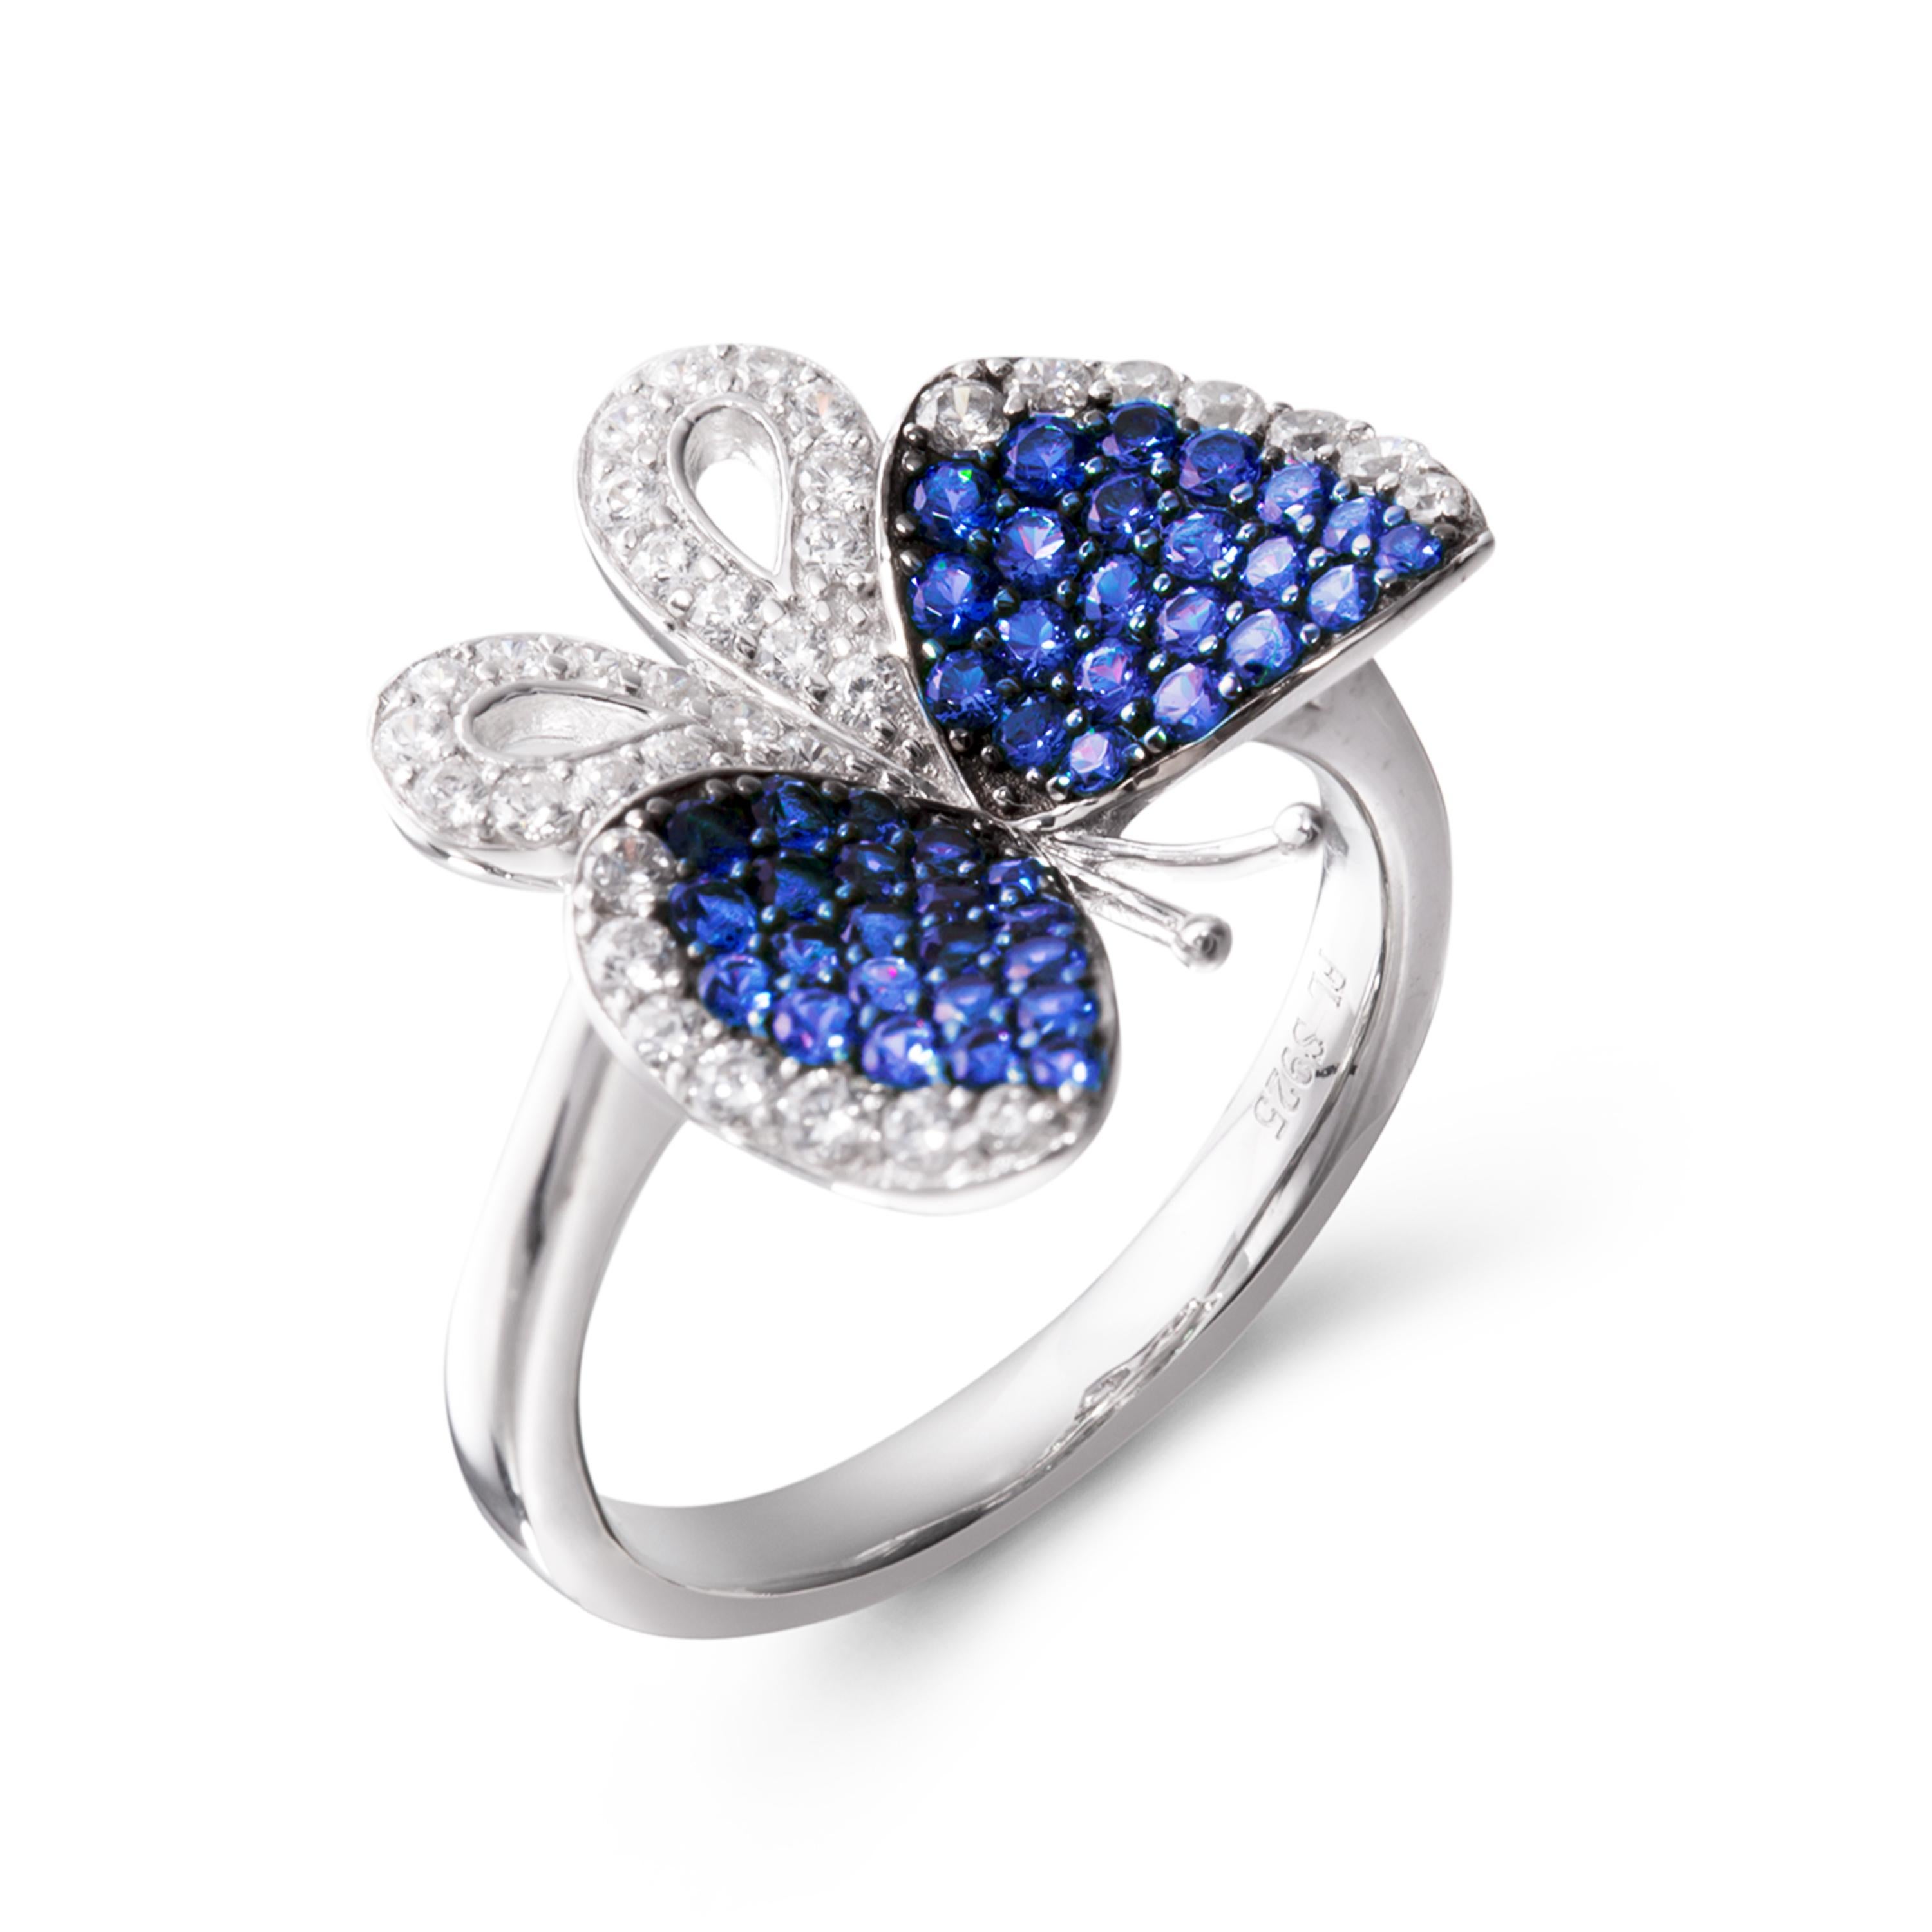 Butterfly captures the feminine essence and the carefree, joyful movement of these intricate and delicate creatures in sparkling weightless jewels. Butterfly ring with wings bejewelled in royal blue and white cubic zirconia set in white rhodium